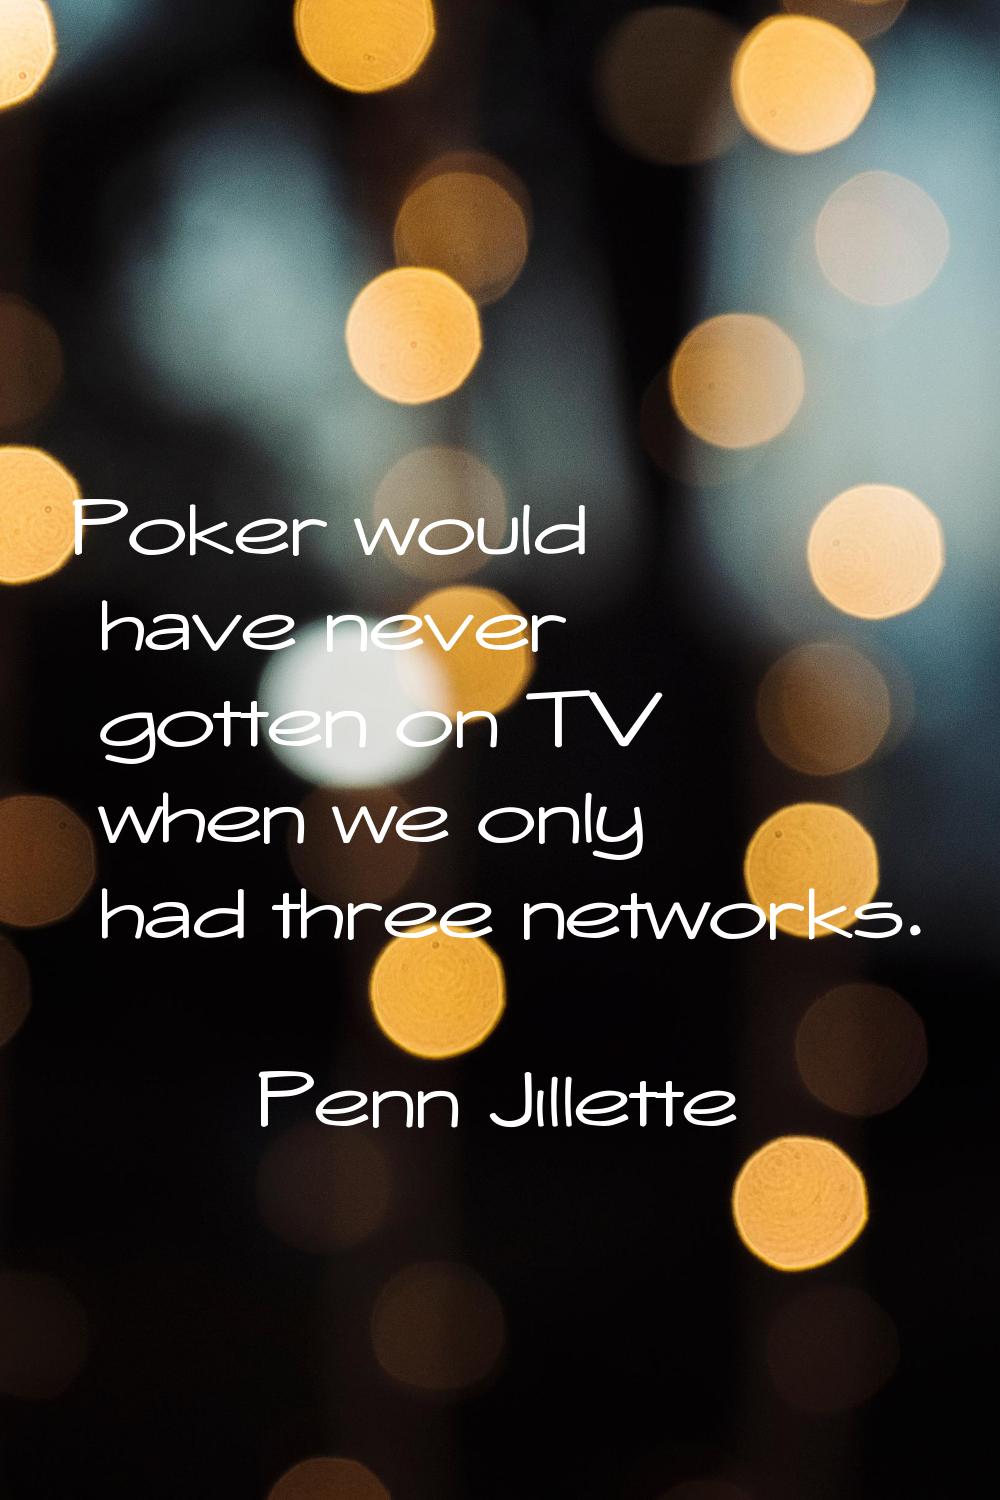 Poker would have never gotten on TV when we only had three networks.